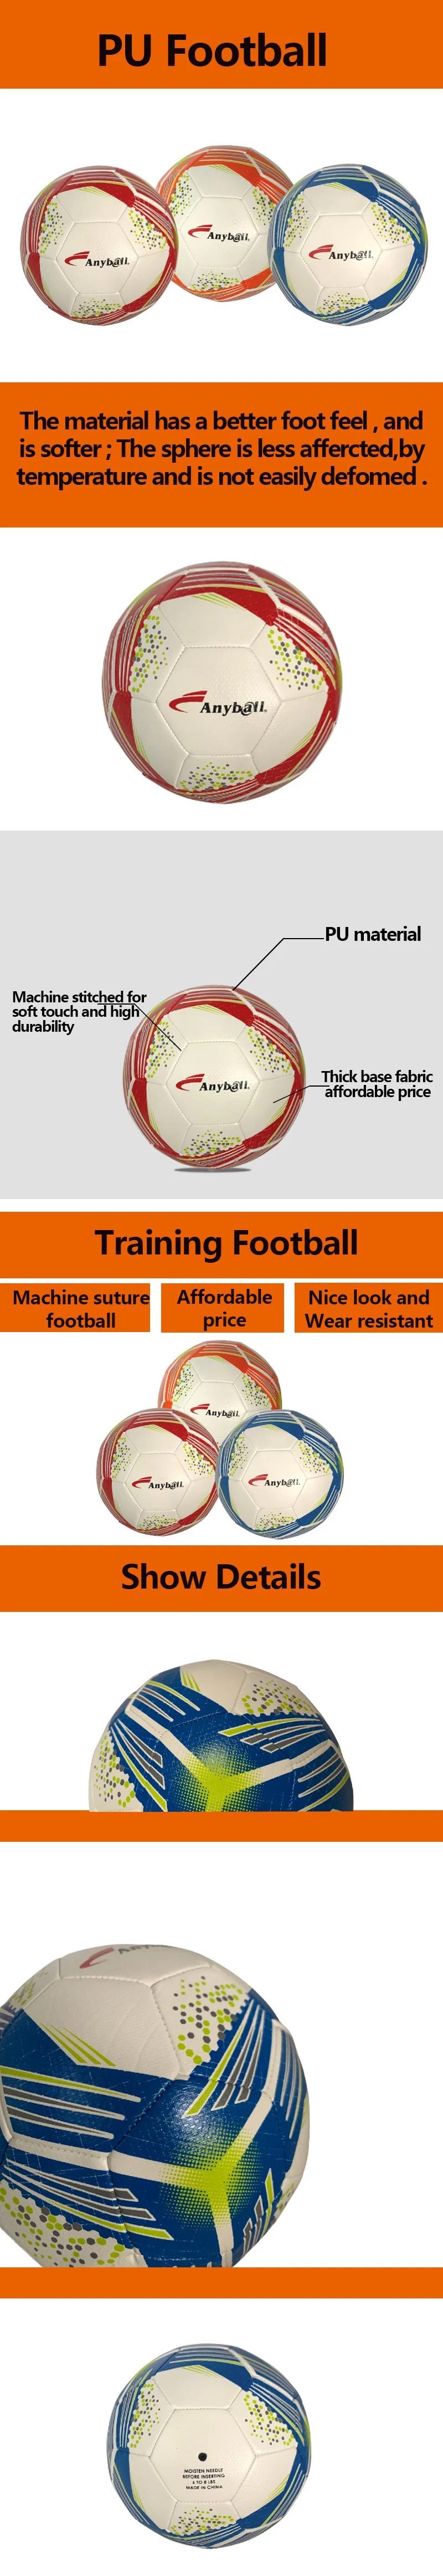 Anyball Size 5 PU Football Soccer Training Ball for Football Match Quality Competition Soccer Balls